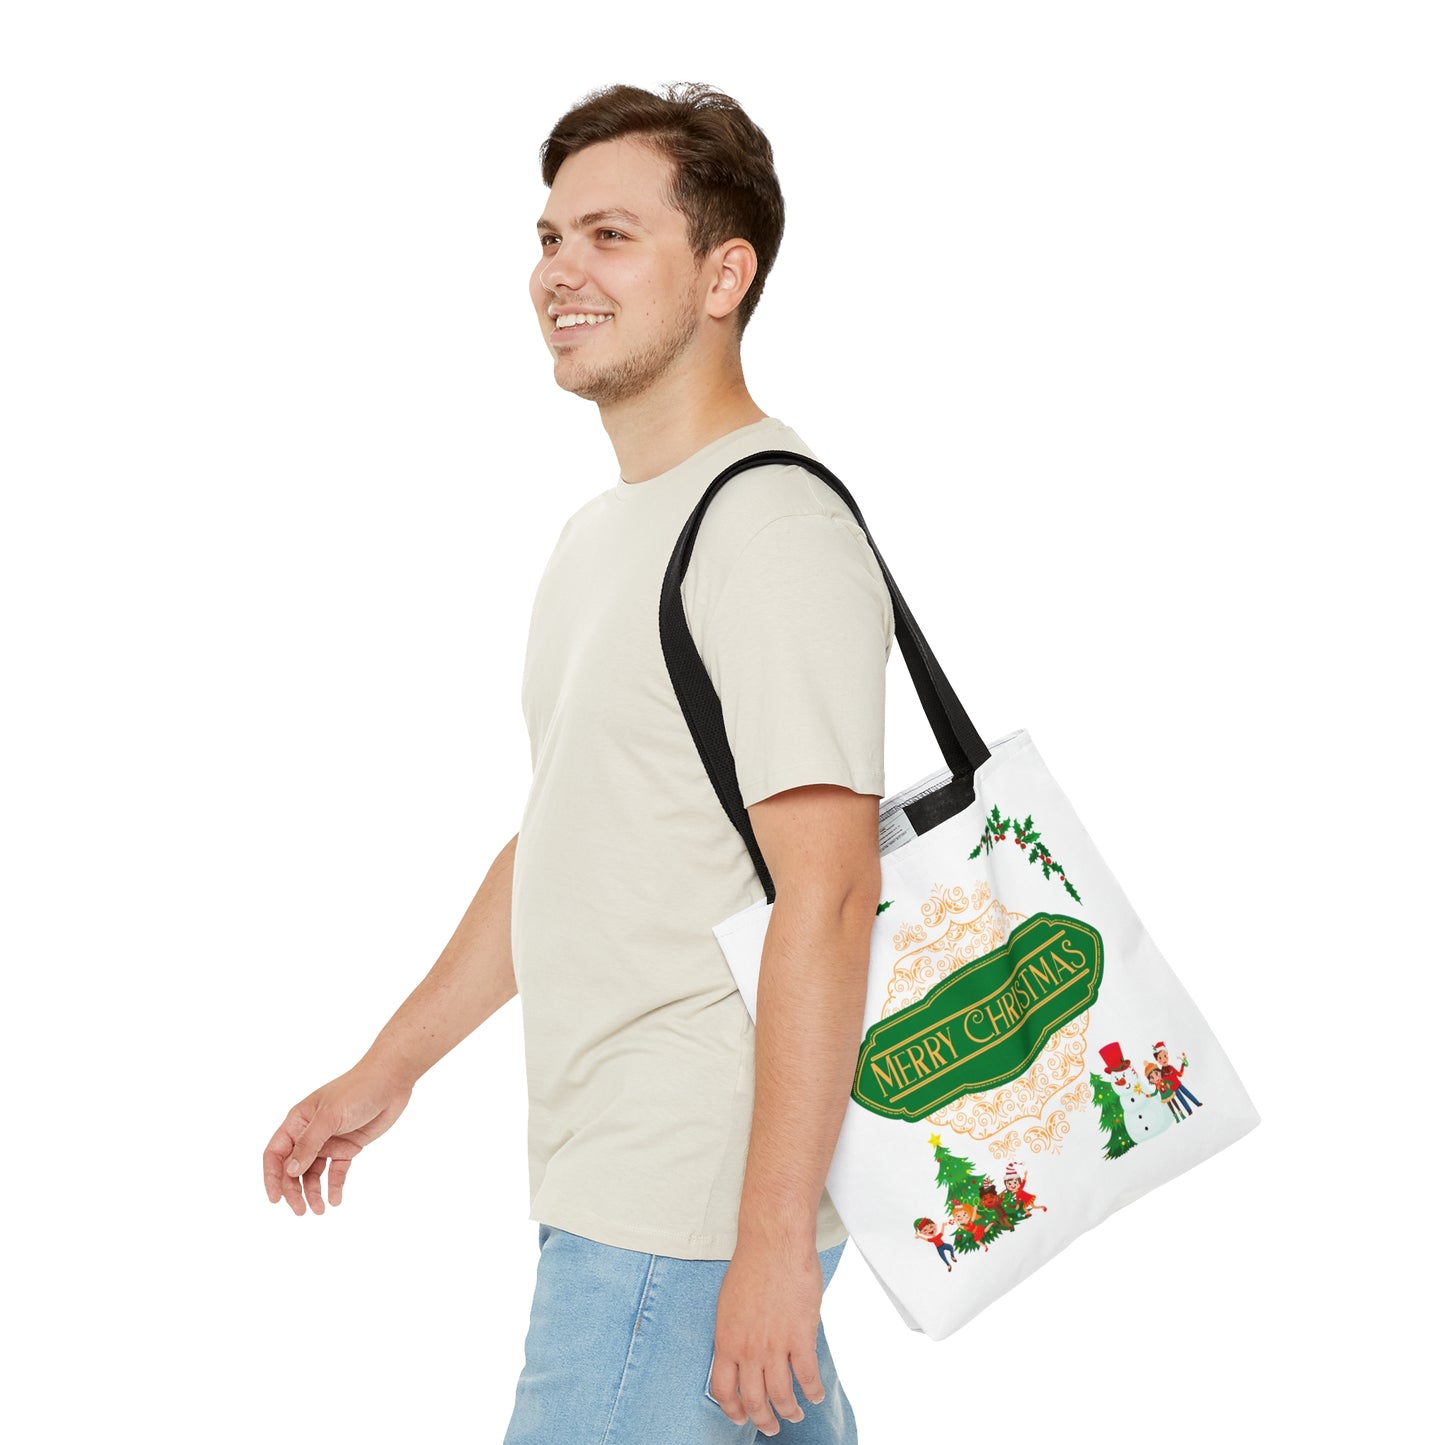 Merry Christmas Printed Tote Bags, in Green